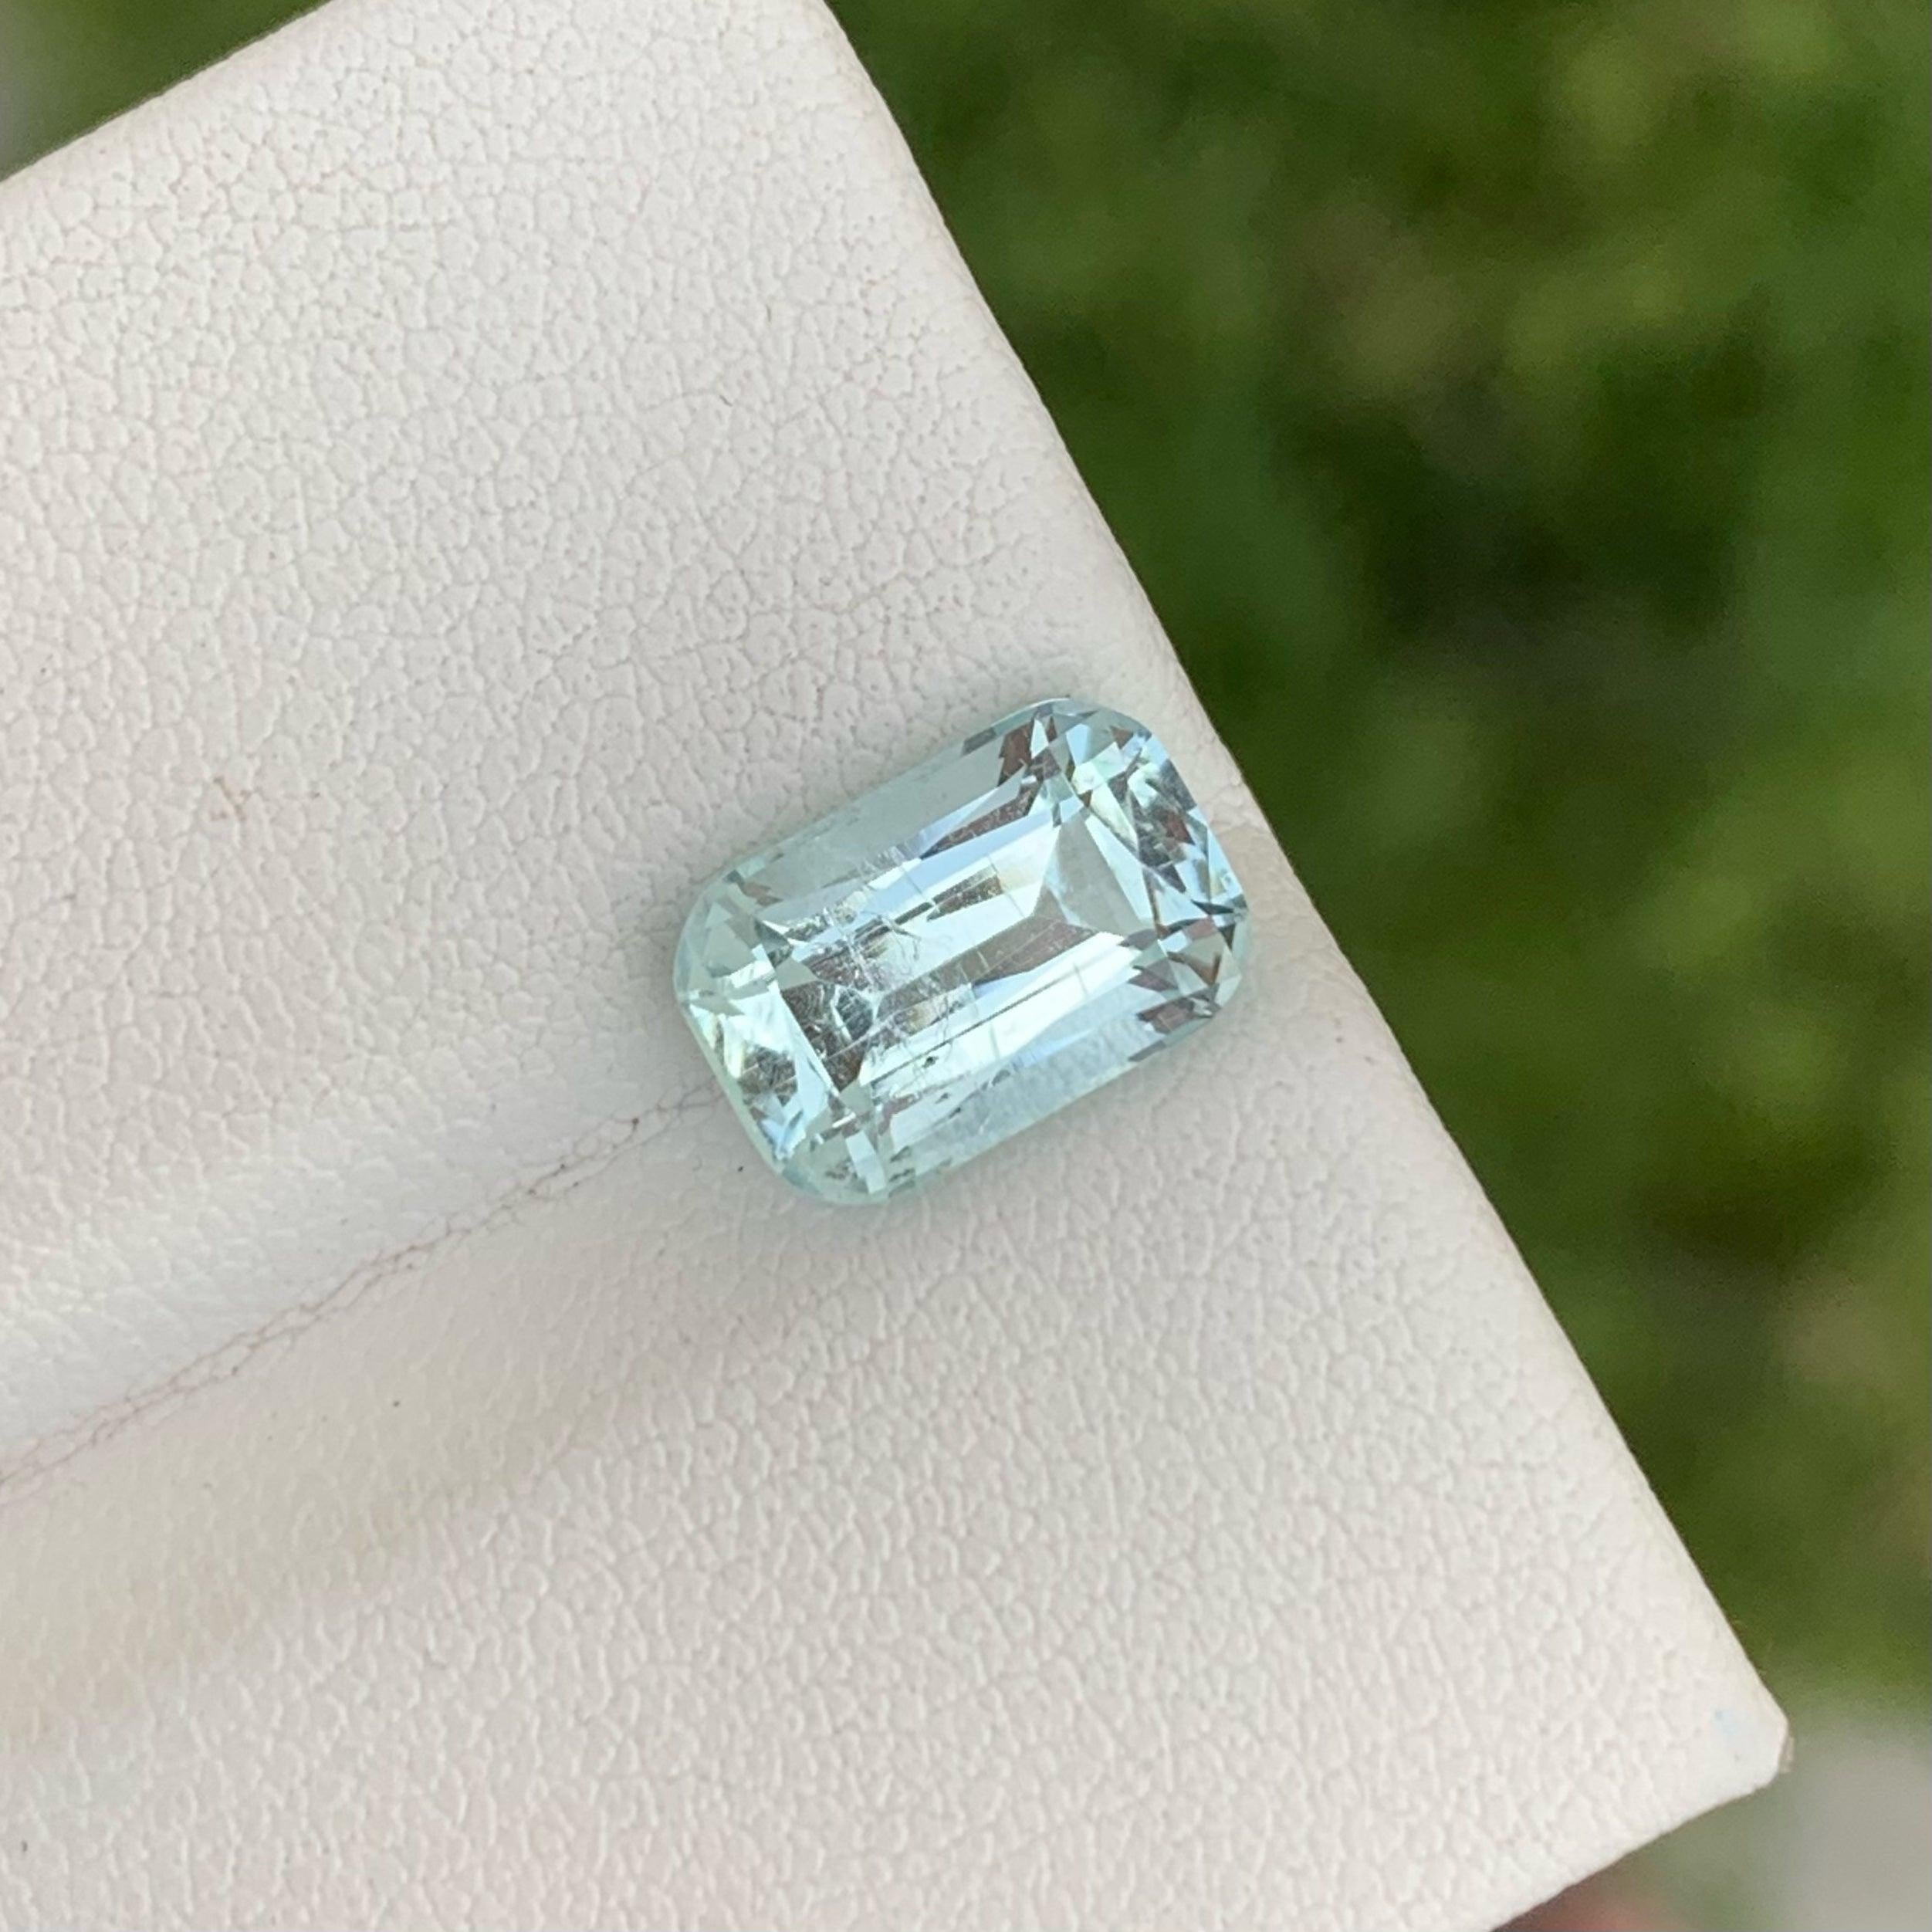 Stunning Light Blue Loose Aquamarine Gemstone, available for sale at wholesale price natural high quality 2.75 Carats  Untreated Aquamarine from Pakistan.

Product Information:
GEMSTONE NAME: Stunning Light Blue Loose Aquamarine